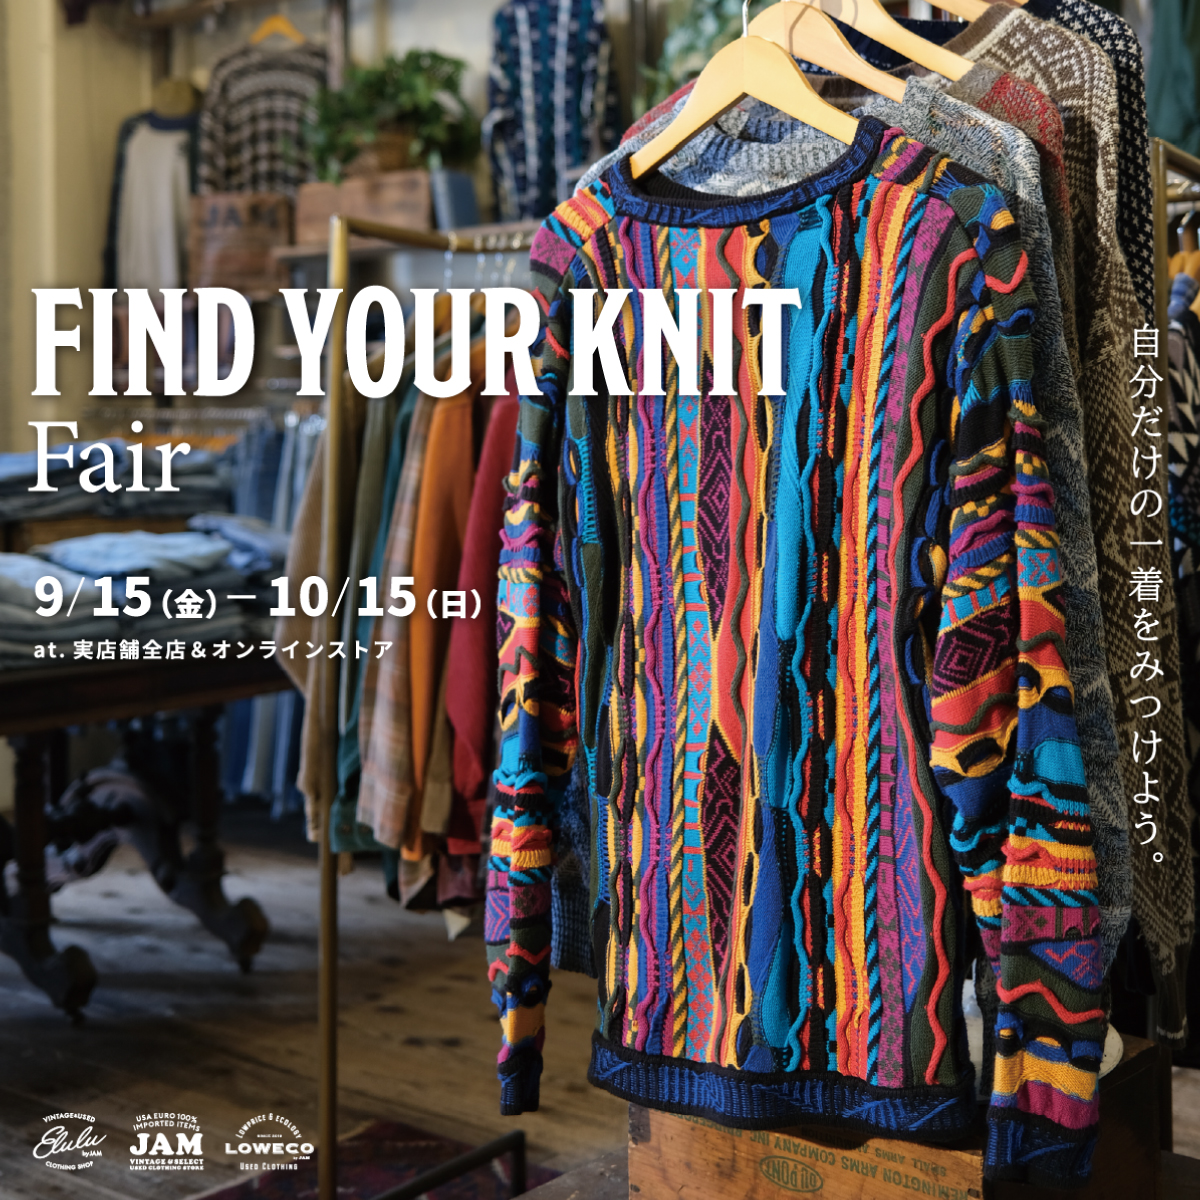 FIND YOUR KNIT